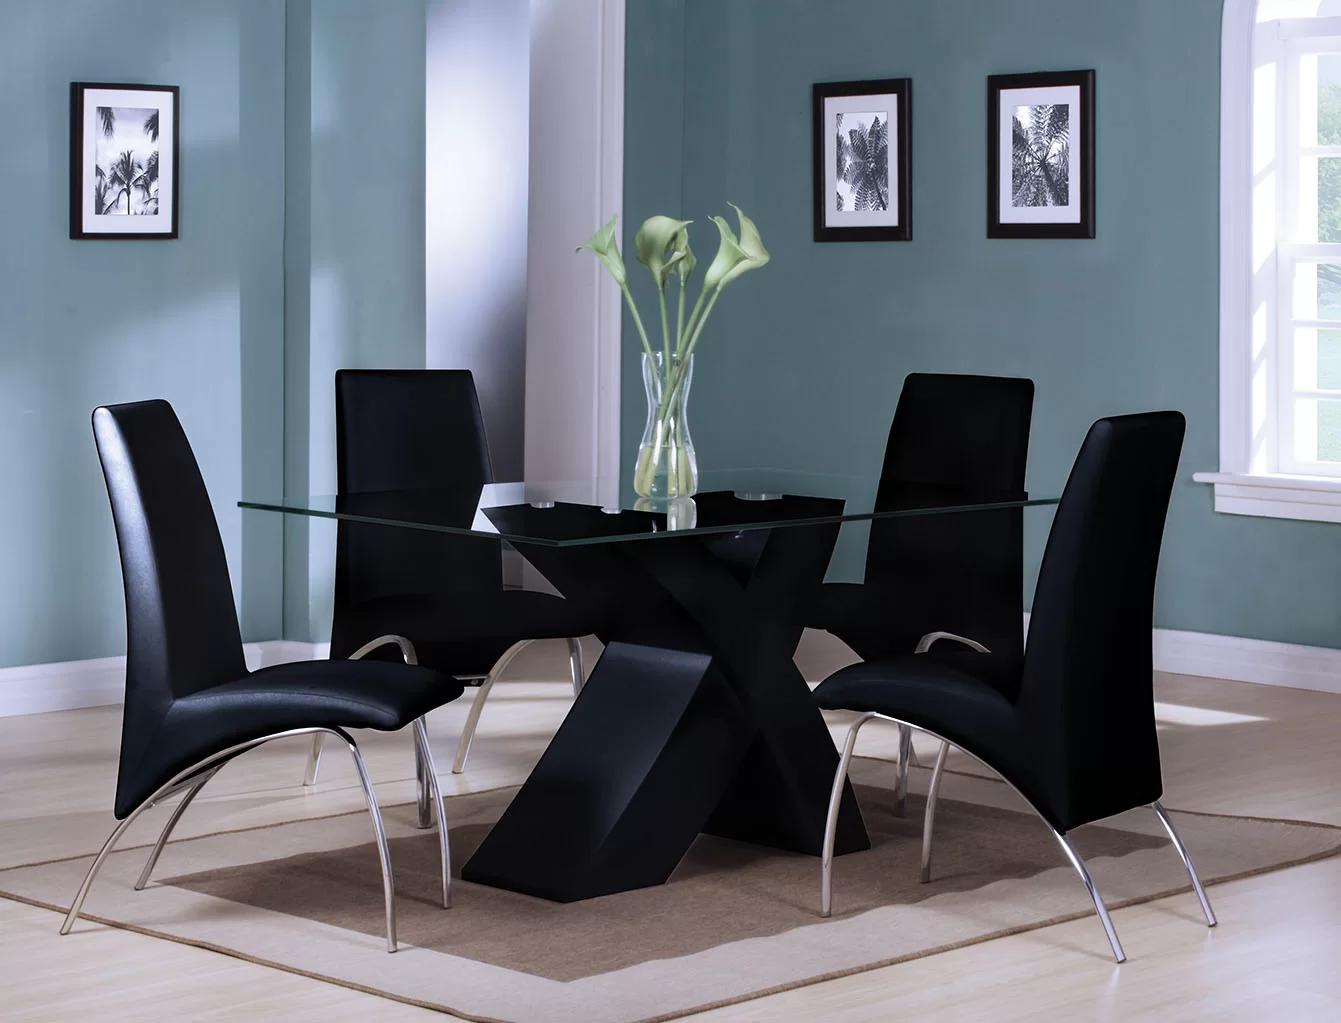 Contemporary Dining Table Set Pervis 71110-5pcs in Black High Gloss